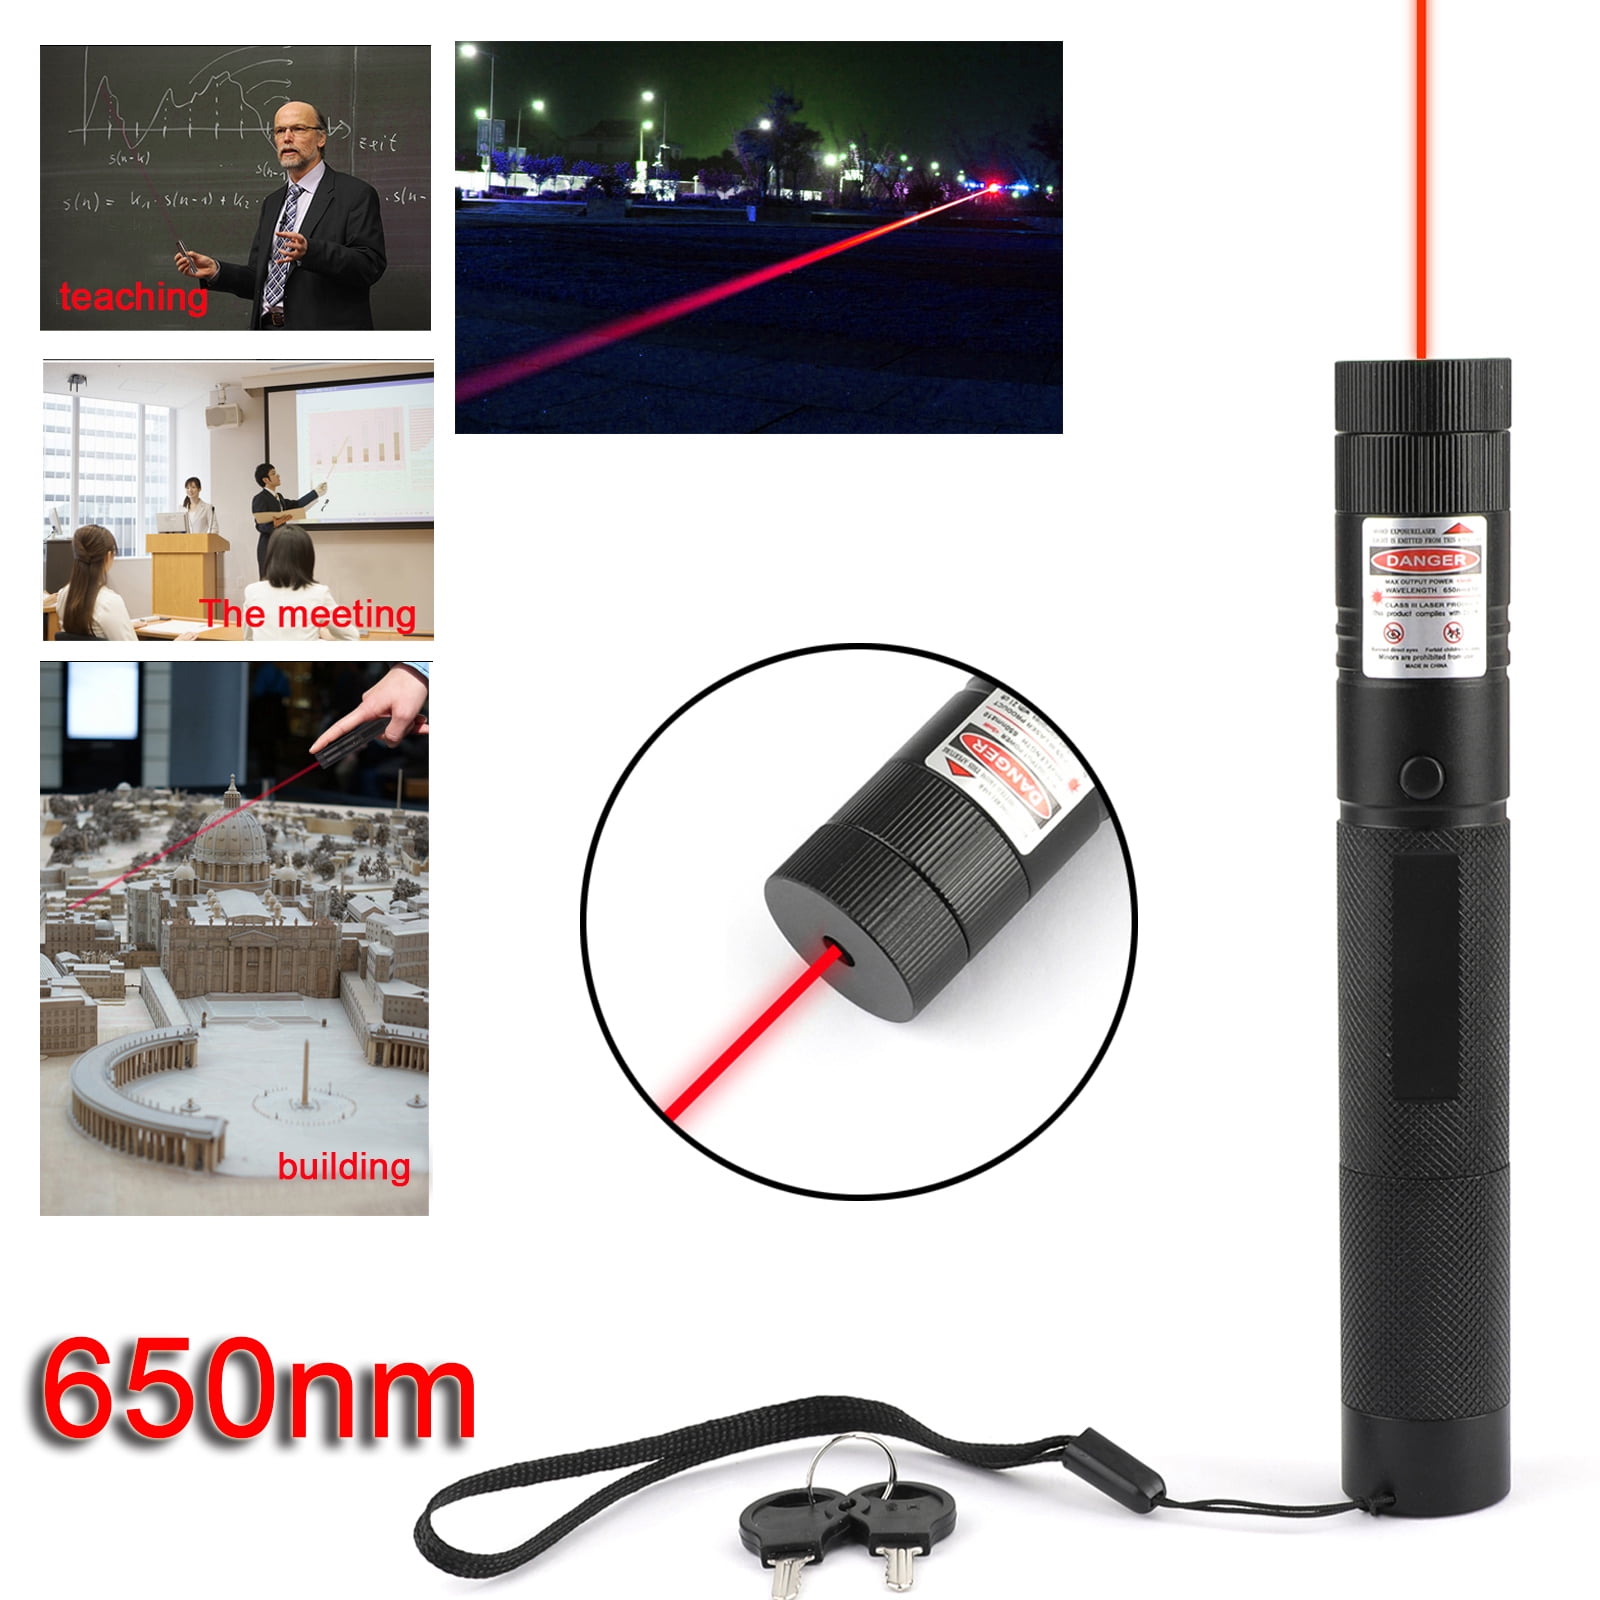 1MW 900Miles Red Laser Pointer Pen 650nm Visible Beam Single Light 18650+Charger